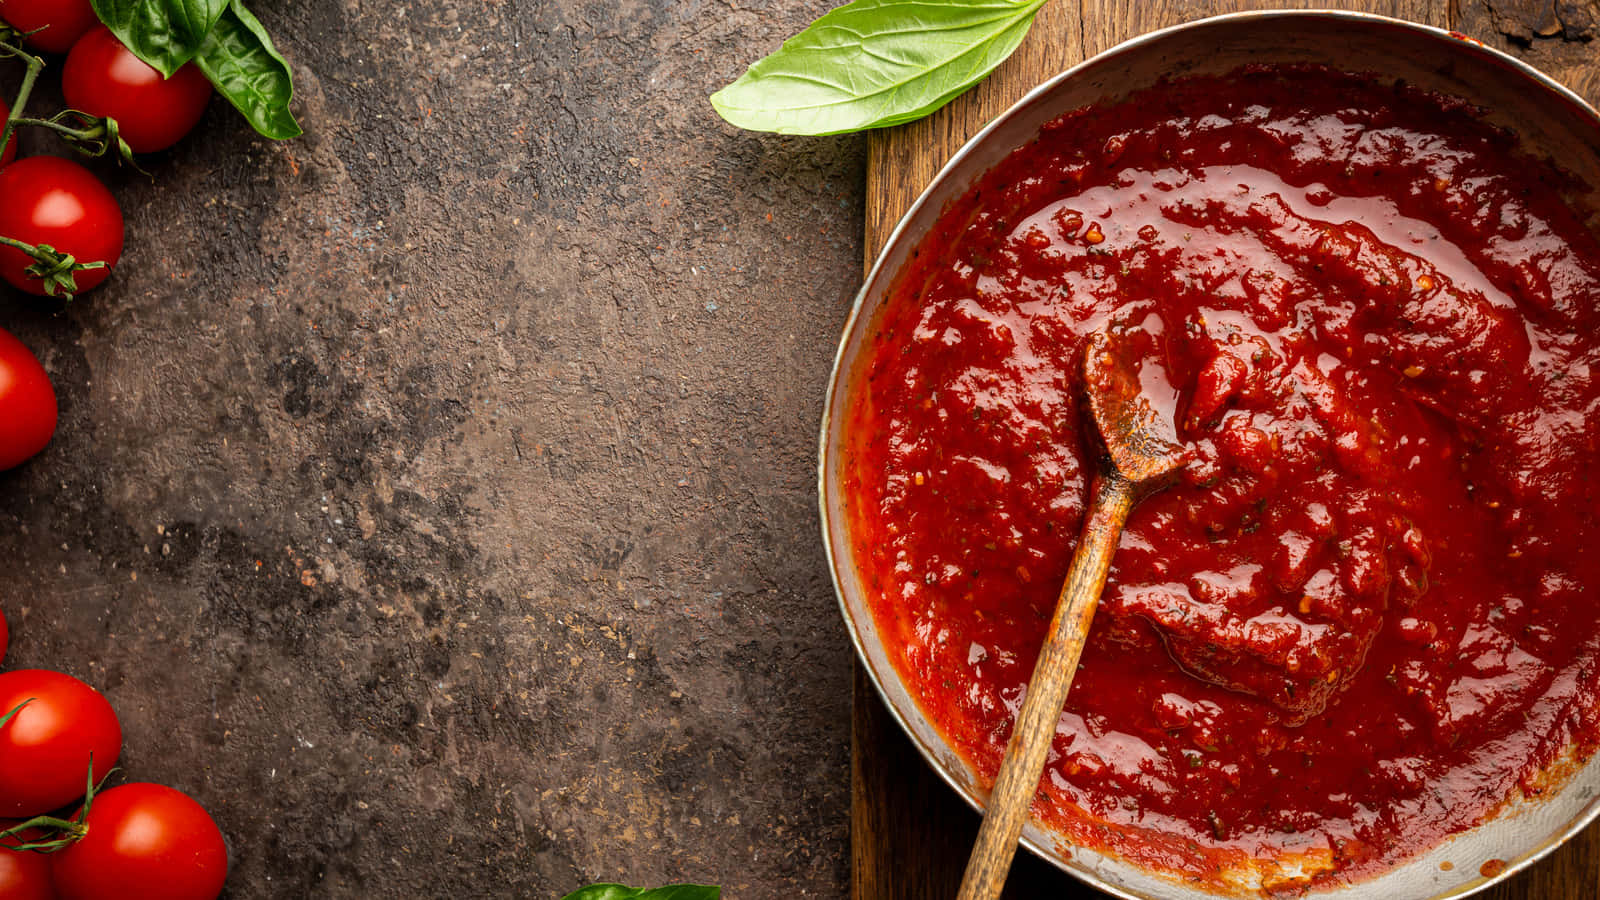 Hearty Red Sauce in a Bowl Wallpaper